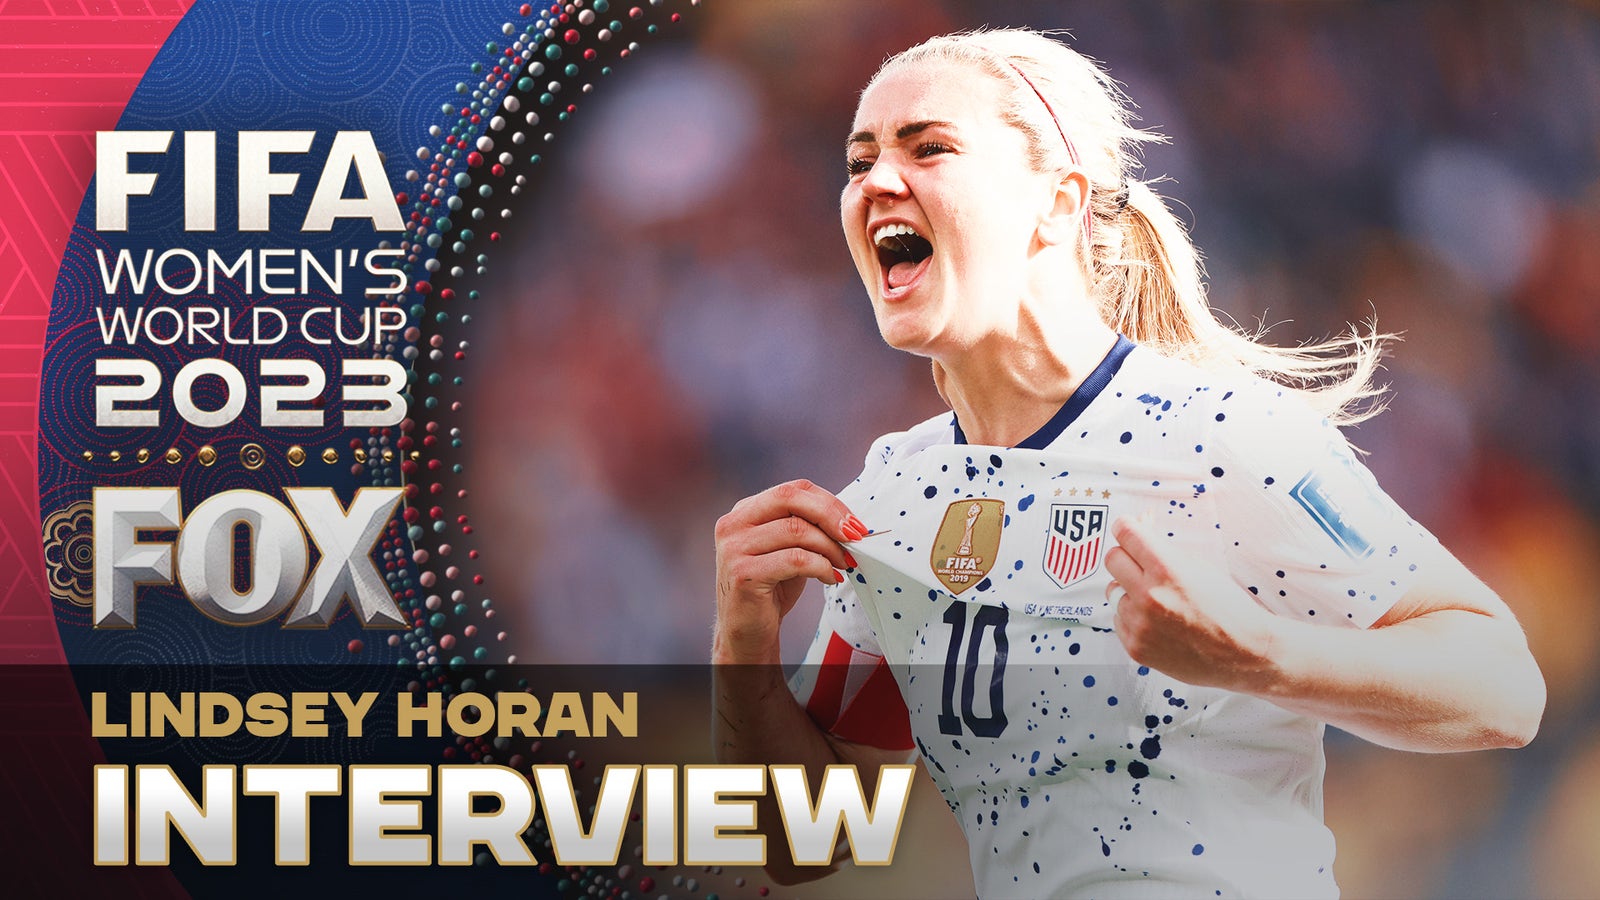 "I got a little pissed at her" — Lindsey Horan breaks down her goal